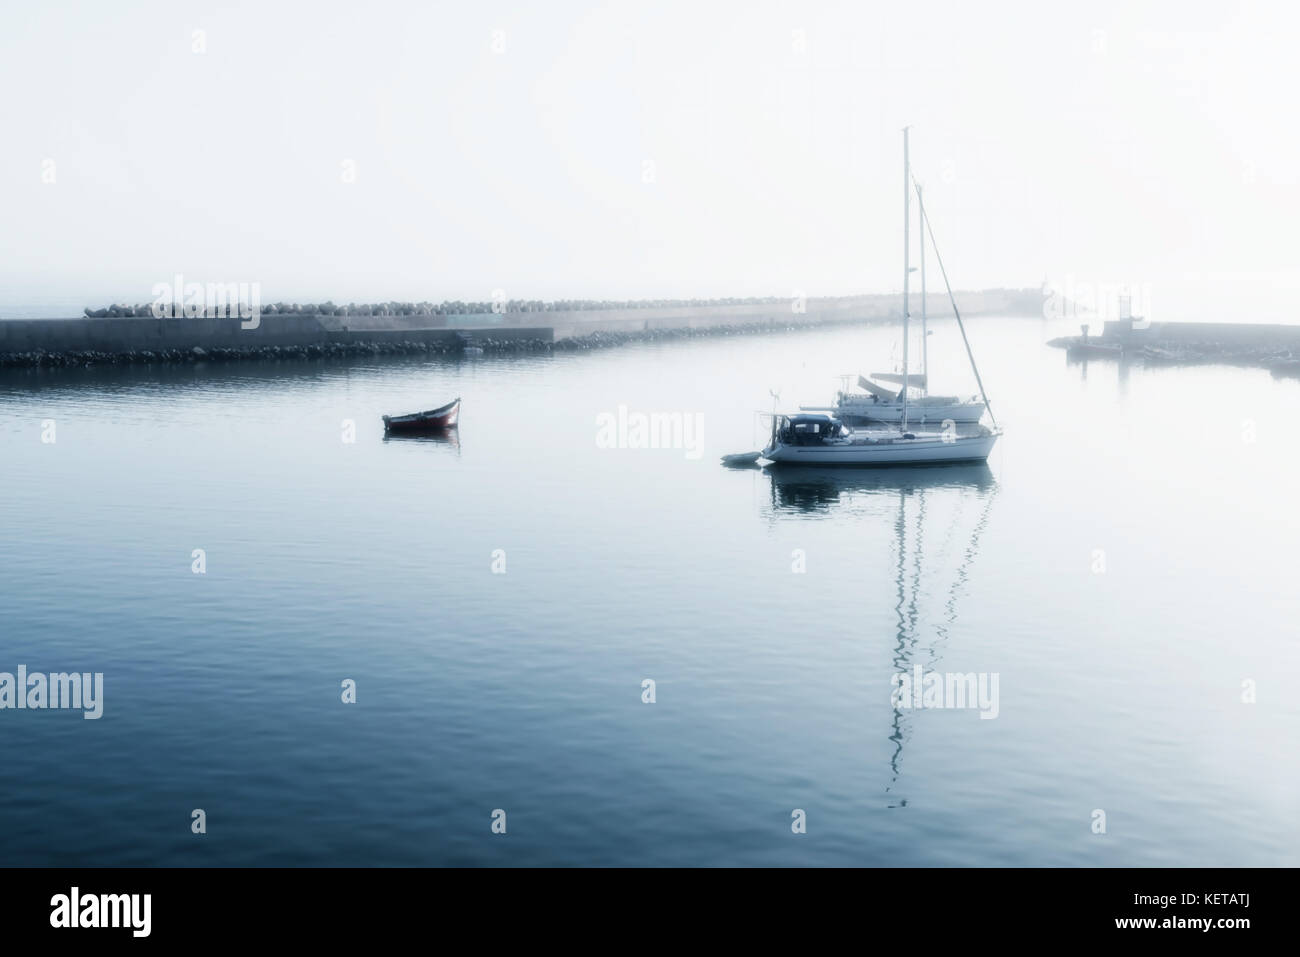 Two sailing boats (yachts) and a small motor boat anchored early morning. High key image with soft focus and glow. Stock Photo